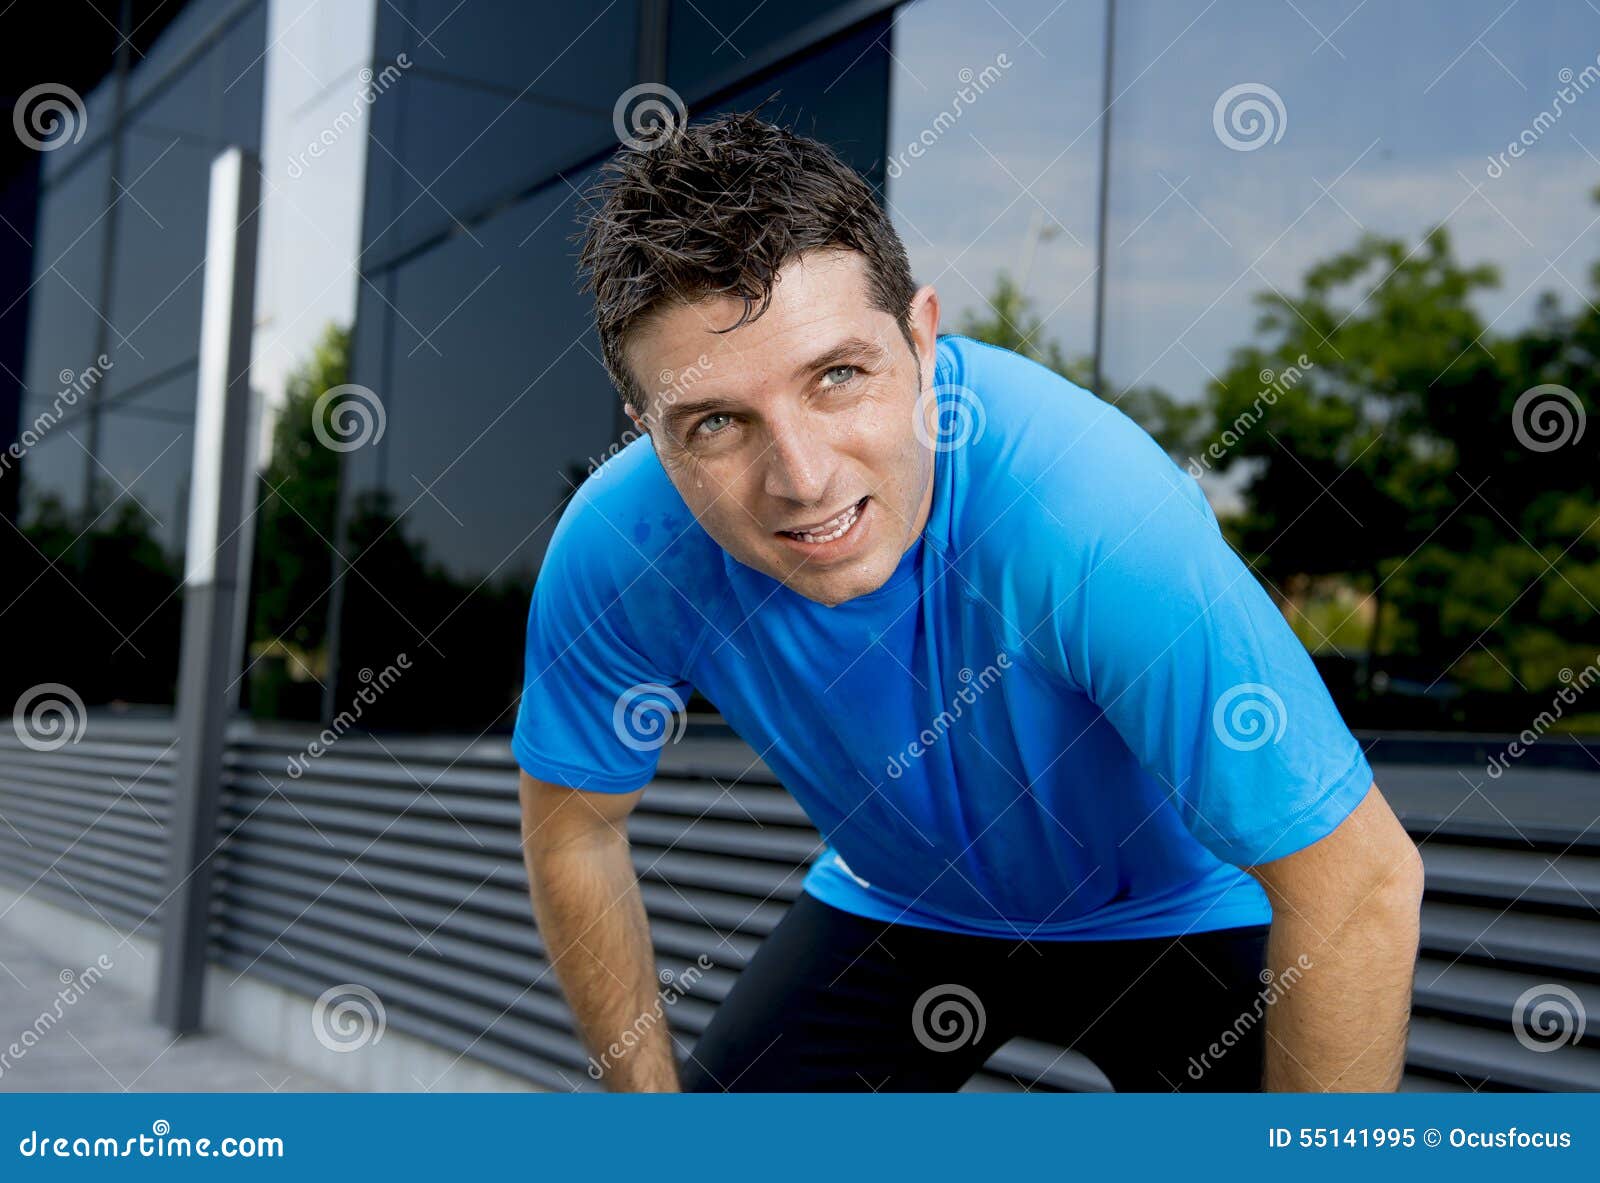 young attractive man leaning exhausted after running session sweating taking a break to recover in urban street